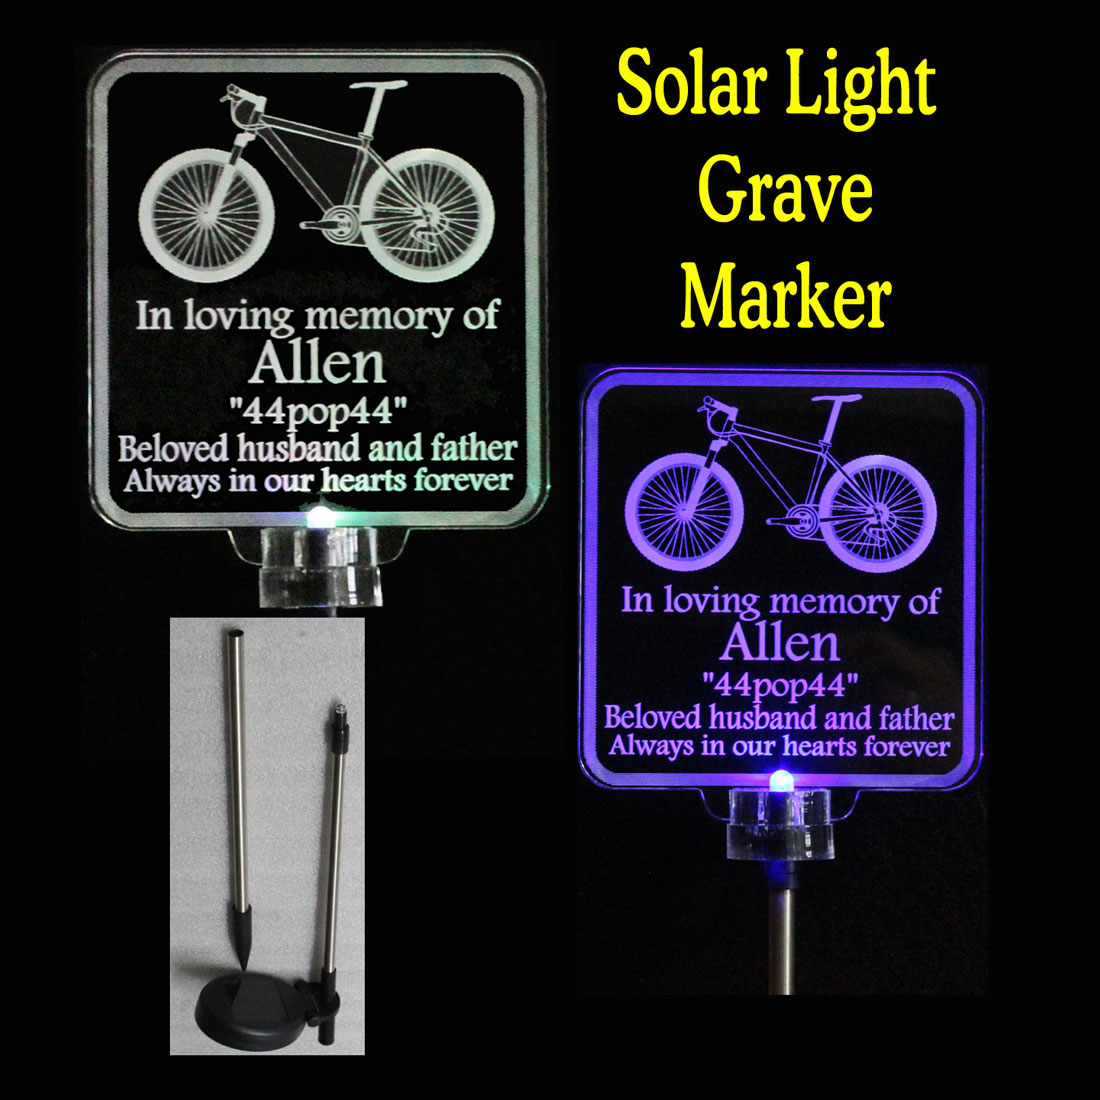 Bicycle Cemetary marker, Bike solar light grave marker, personalized